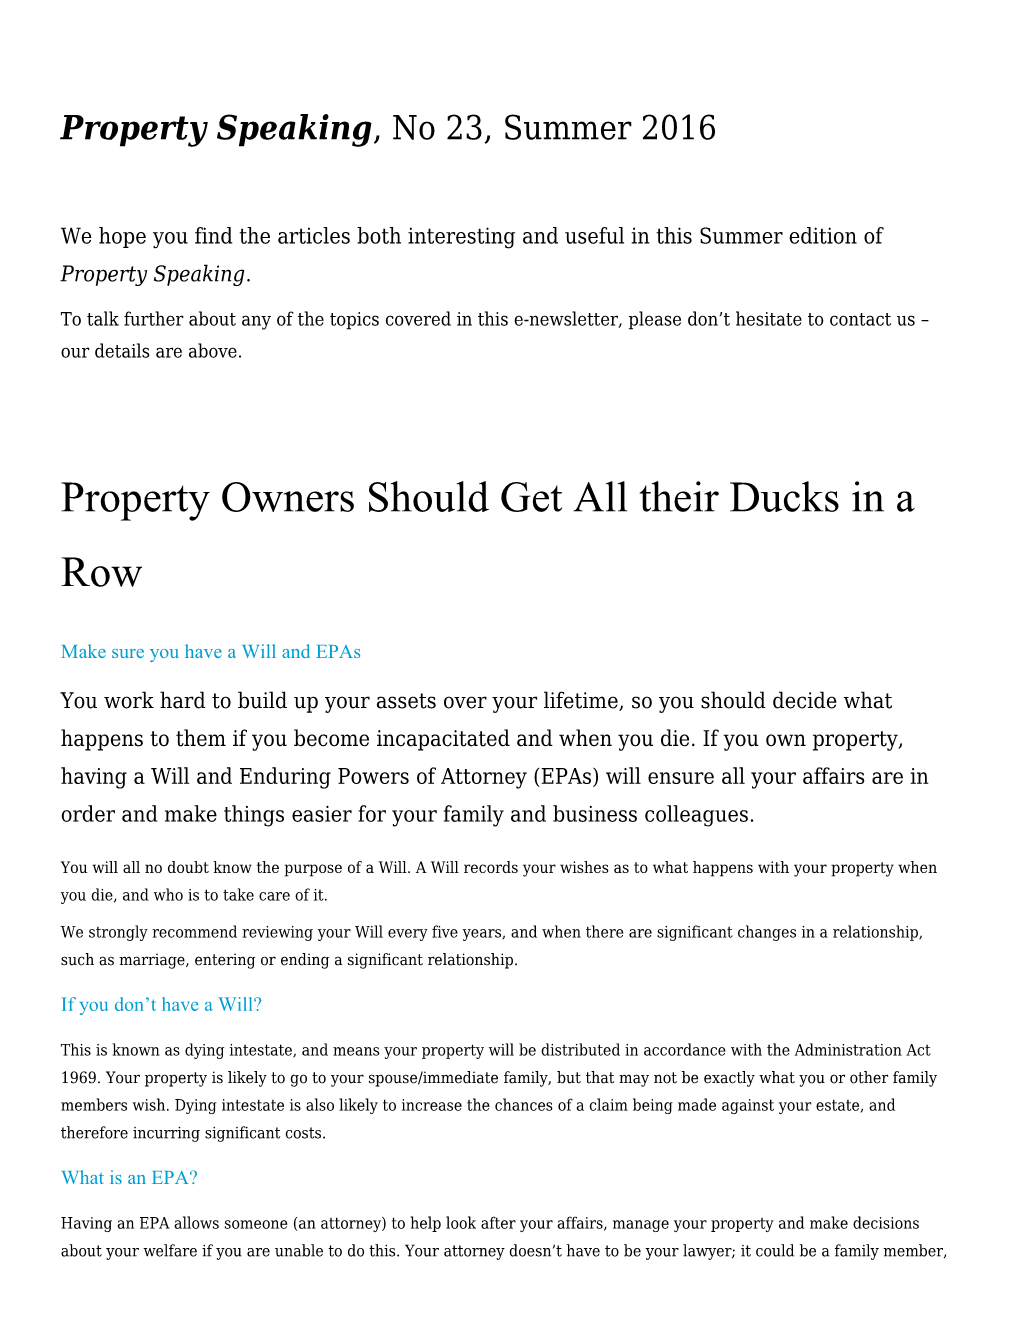 Property Owners Should Get All Their Ducks in a Row